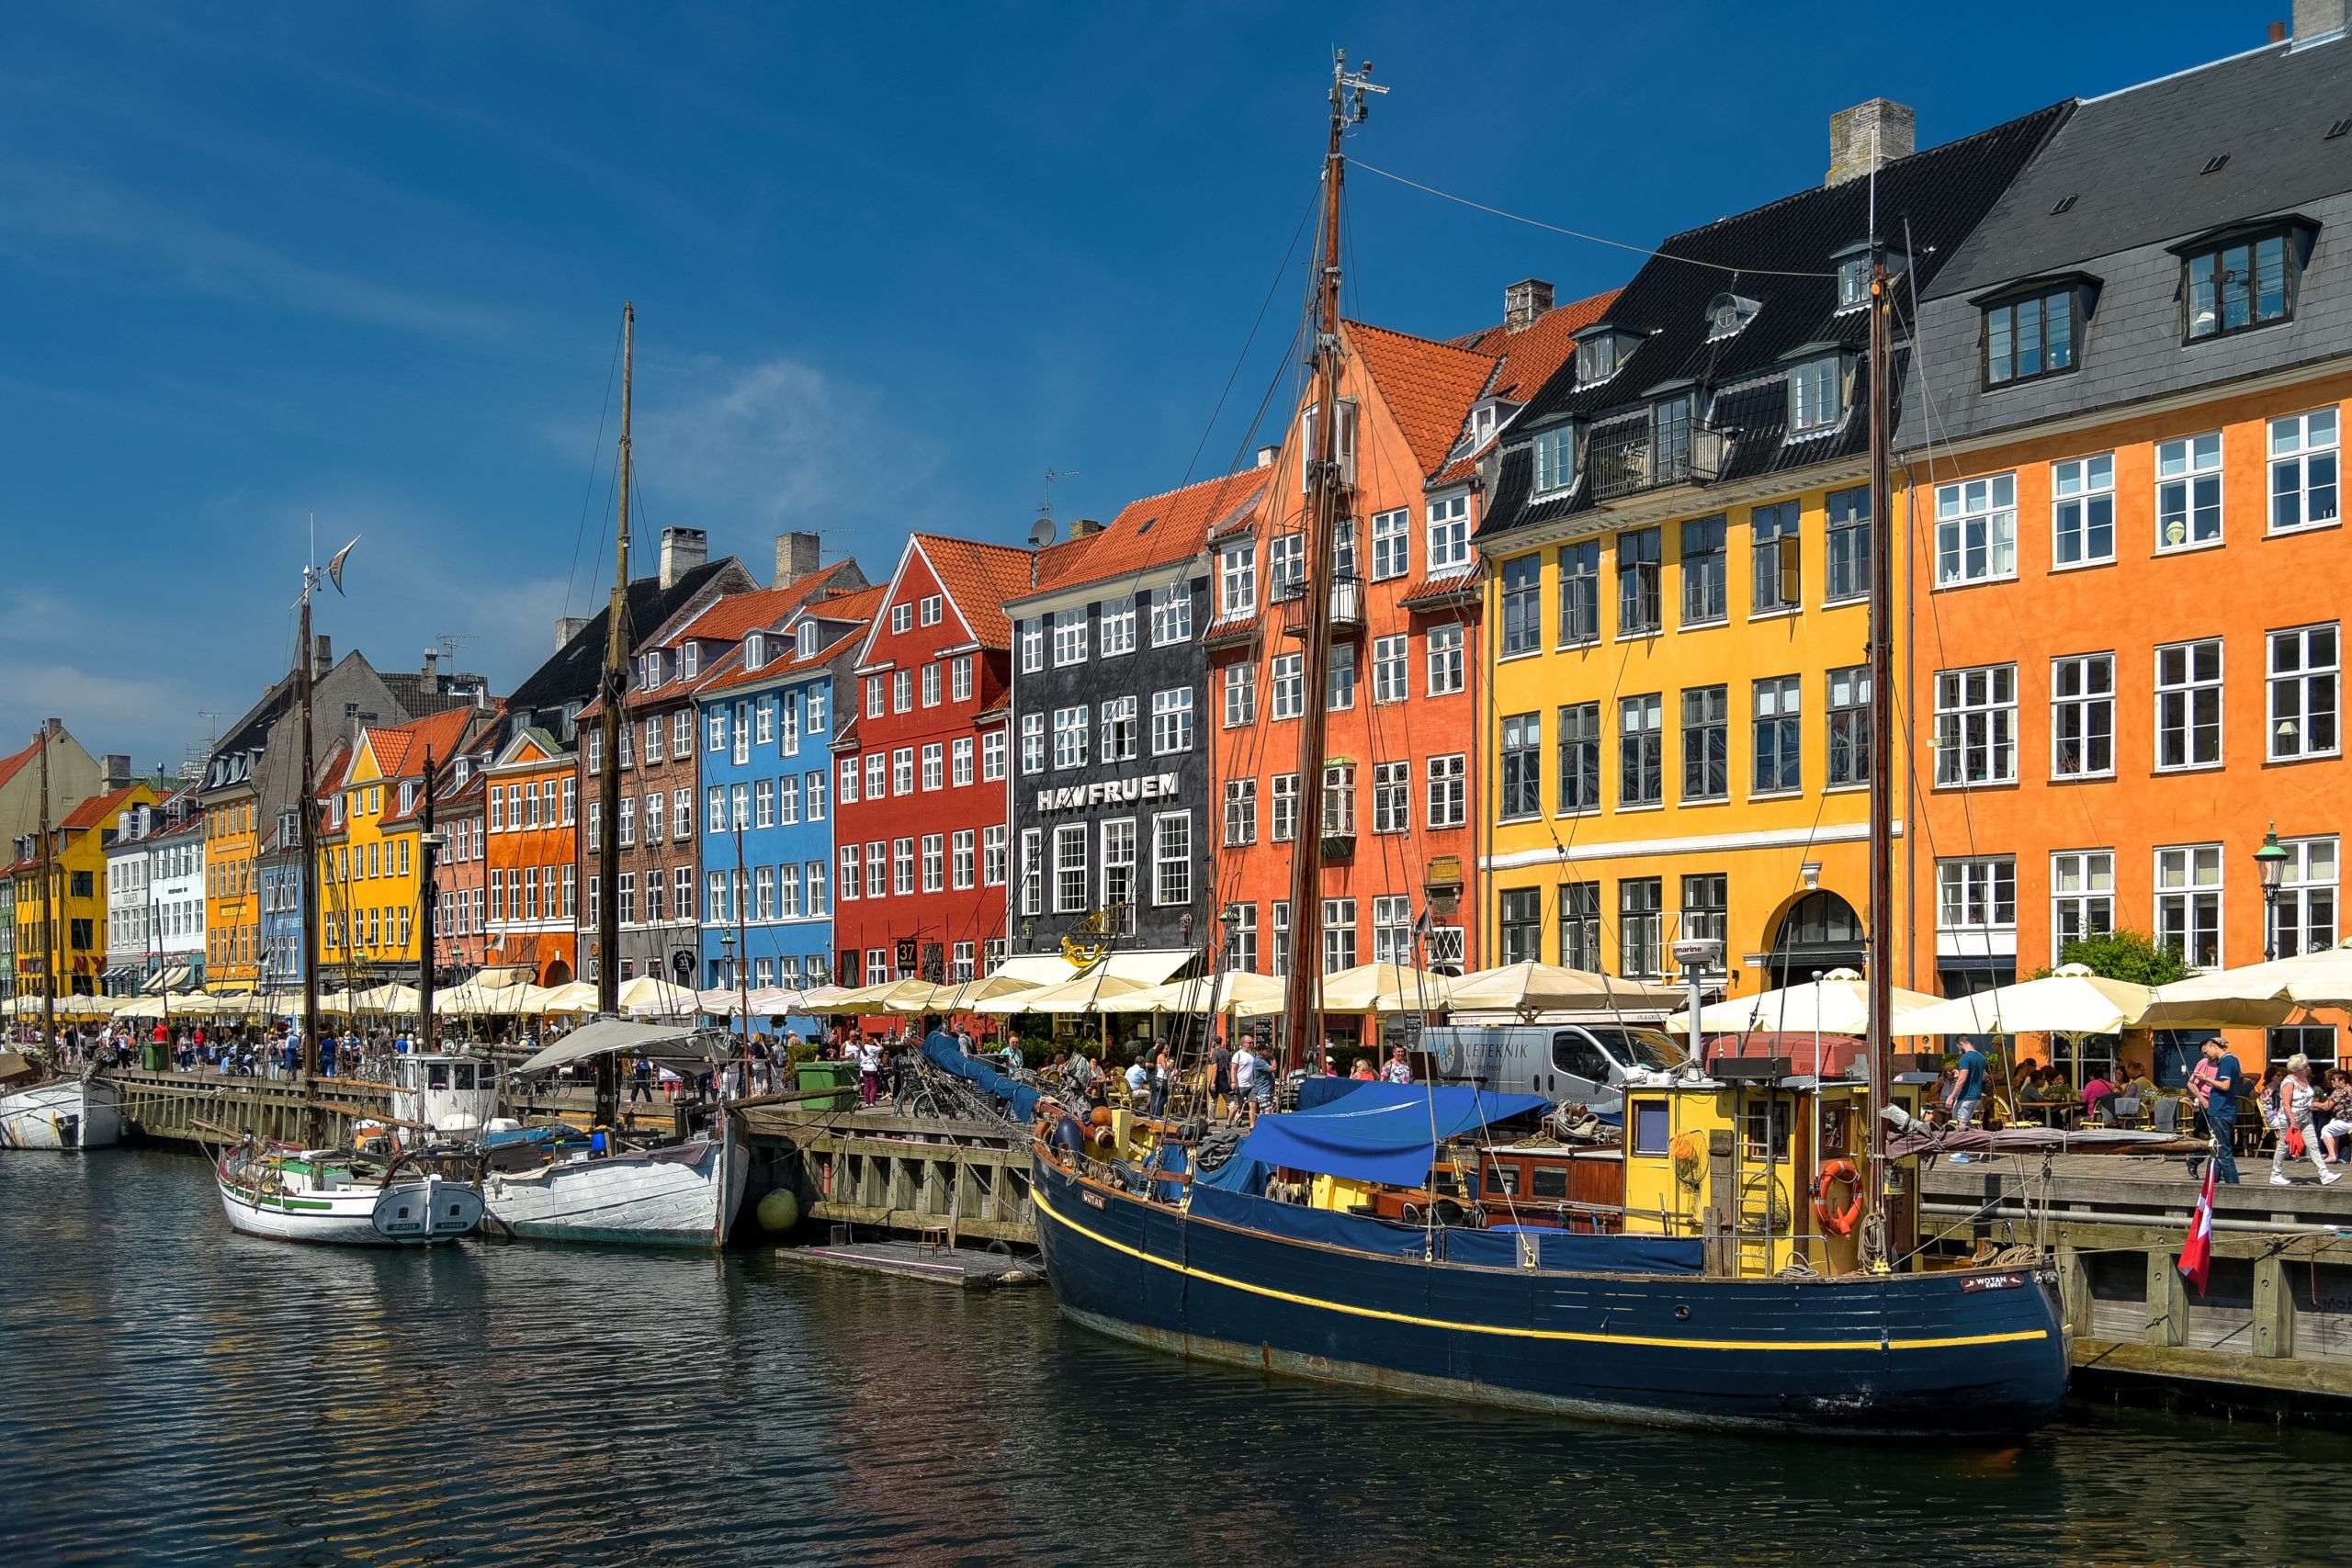 Denmark the safest country in the world – study